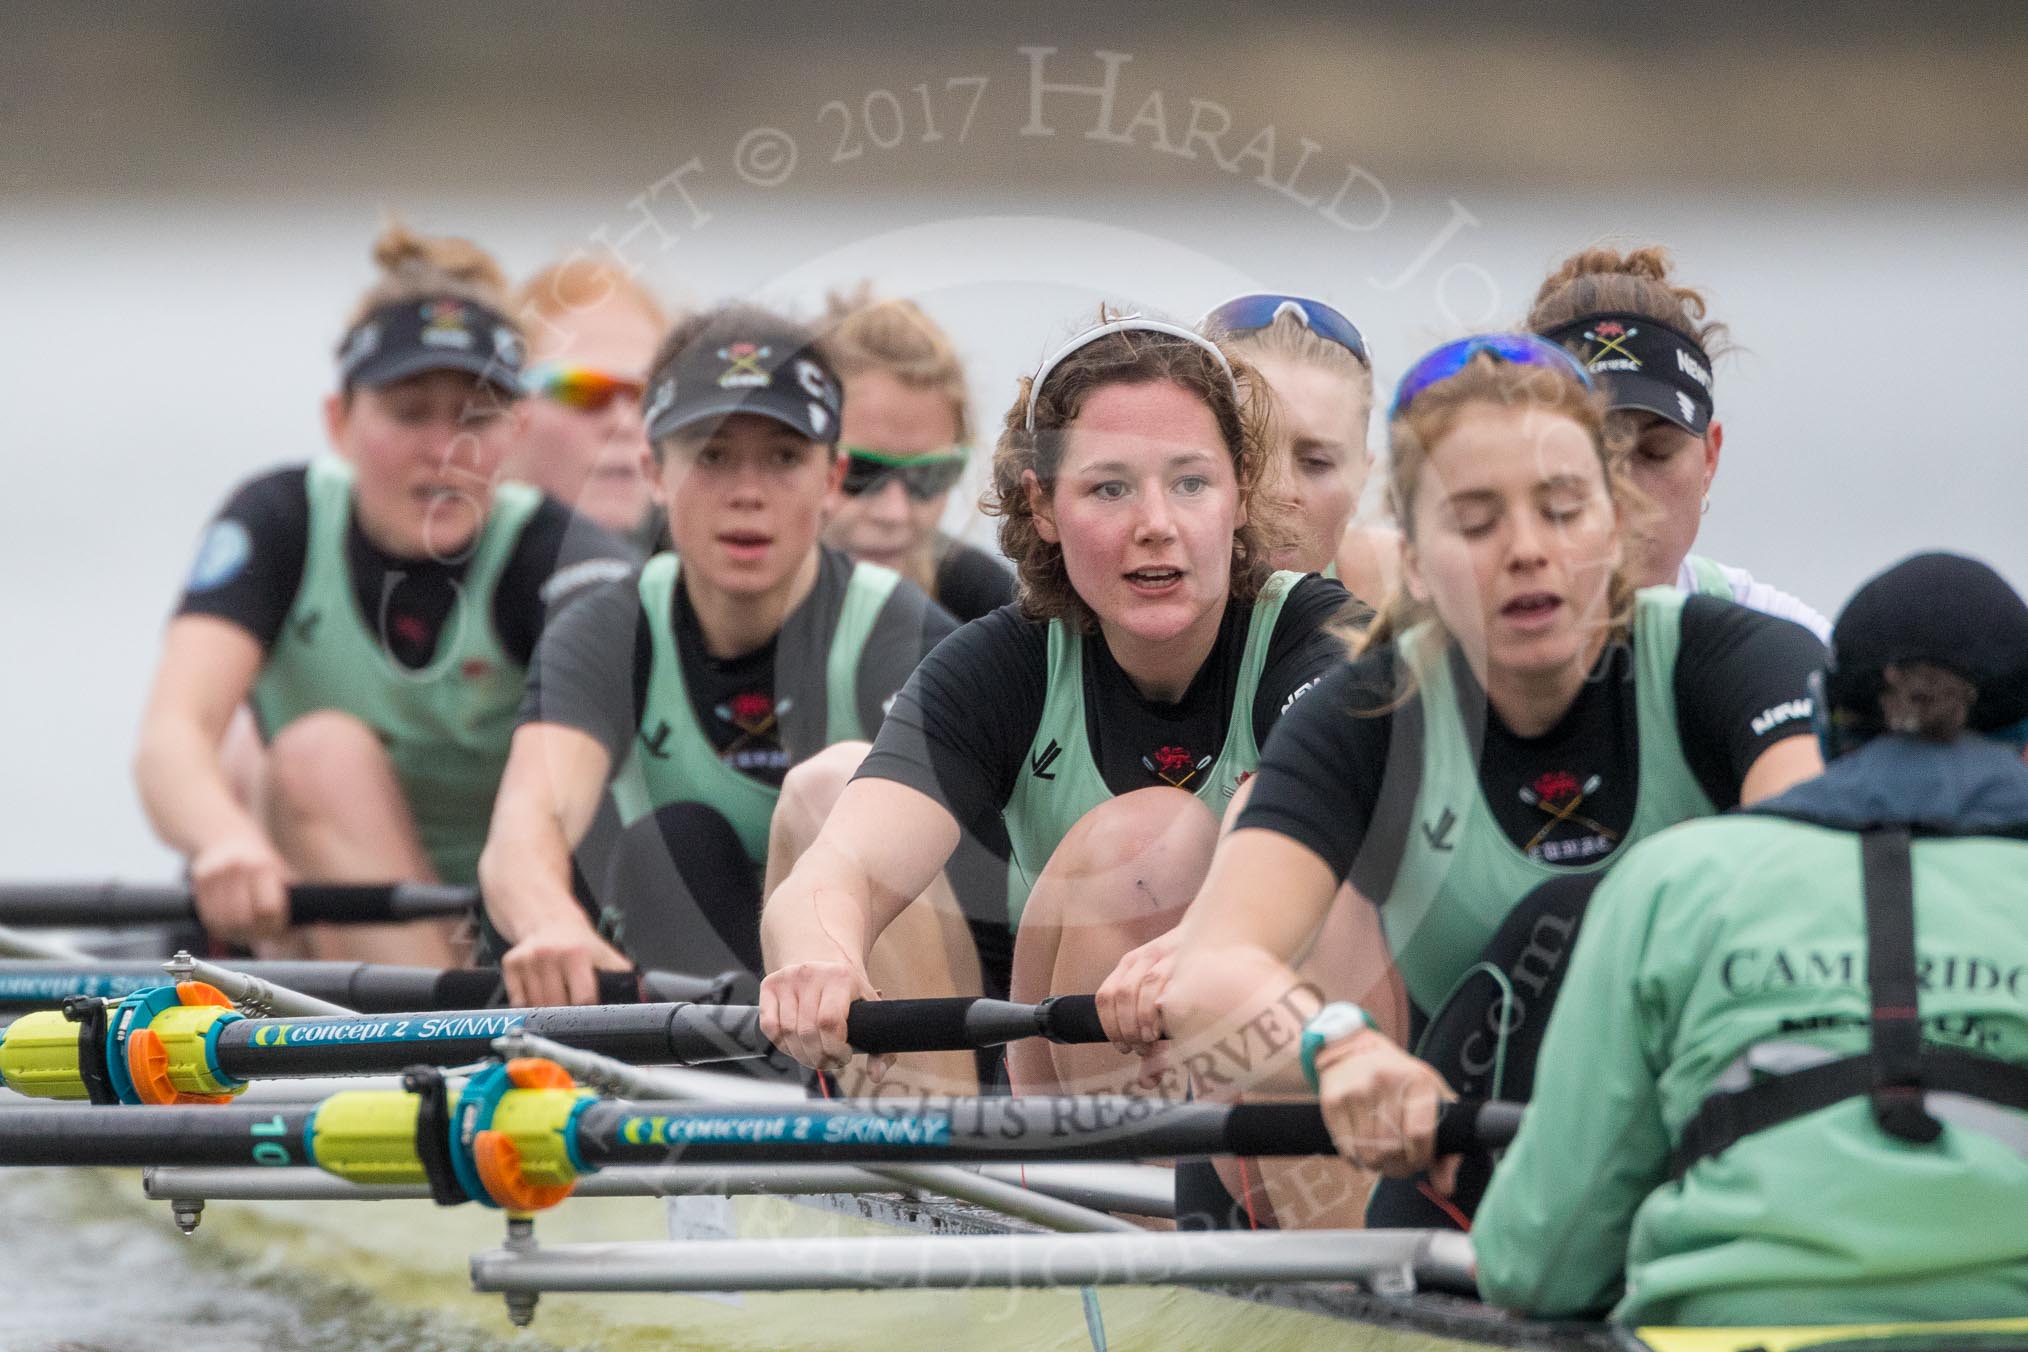 The Boat Race season 2017 - Women's Boat Race Fixture CUWBC vs Univerity of London: The CUWBC after the start of the second piece of the fixture, bow - Claire Lambe, 2 - Kirsten Van Fosen, 3 - Ashton Brown, 4 - Imogen Grant, 5 - Holy Hill, 6 - Melissa Wilson, 7 - Myriam Goudet, stroke - Alice White, cox - Matthew Holland.
River Thames between Putney Bridge and Mortlake,
London SW15,

United Kingdom,
on 19 February 2017 at 16:22, image #123